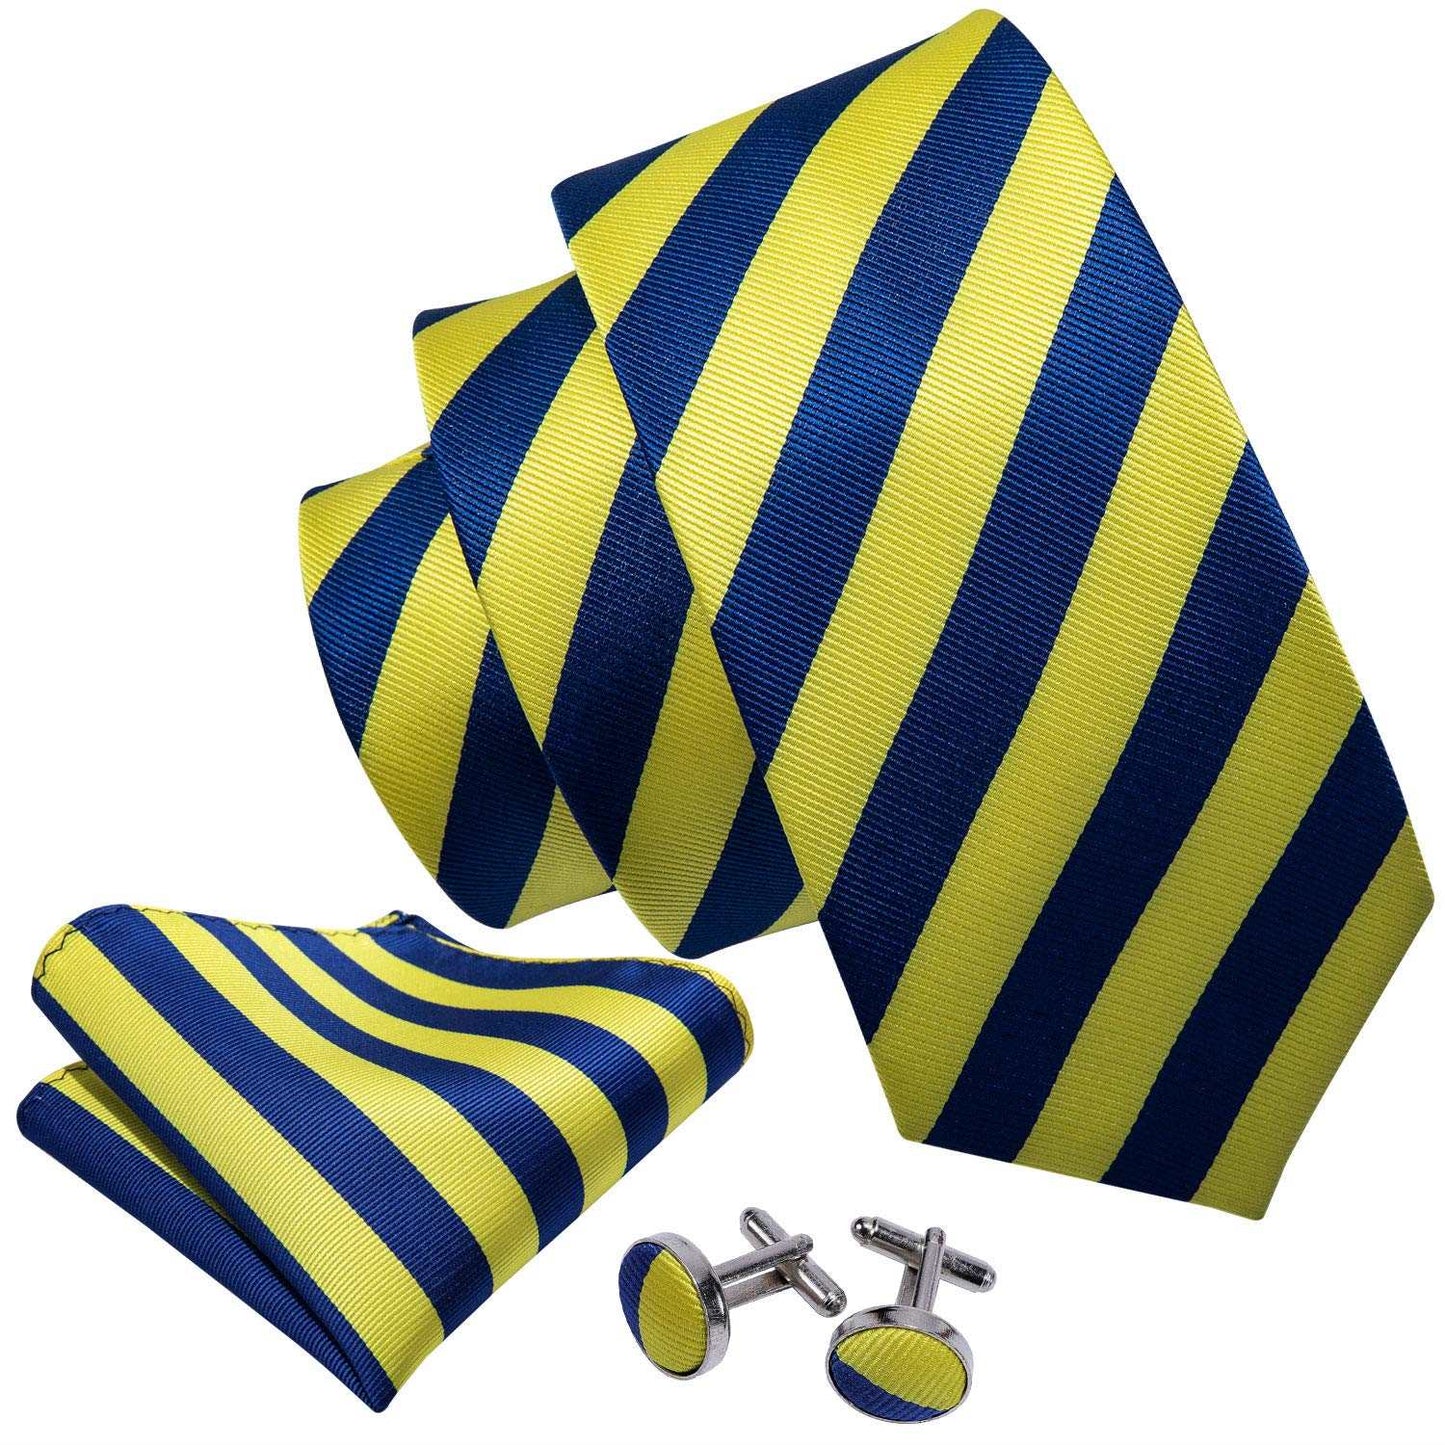 Barry.Wang Designer Men's Yellow and Blue Strip Tie Set - Fashion Woven Neck Tie Hanky Cufflinks Set For Wedding Party Business - Hatke